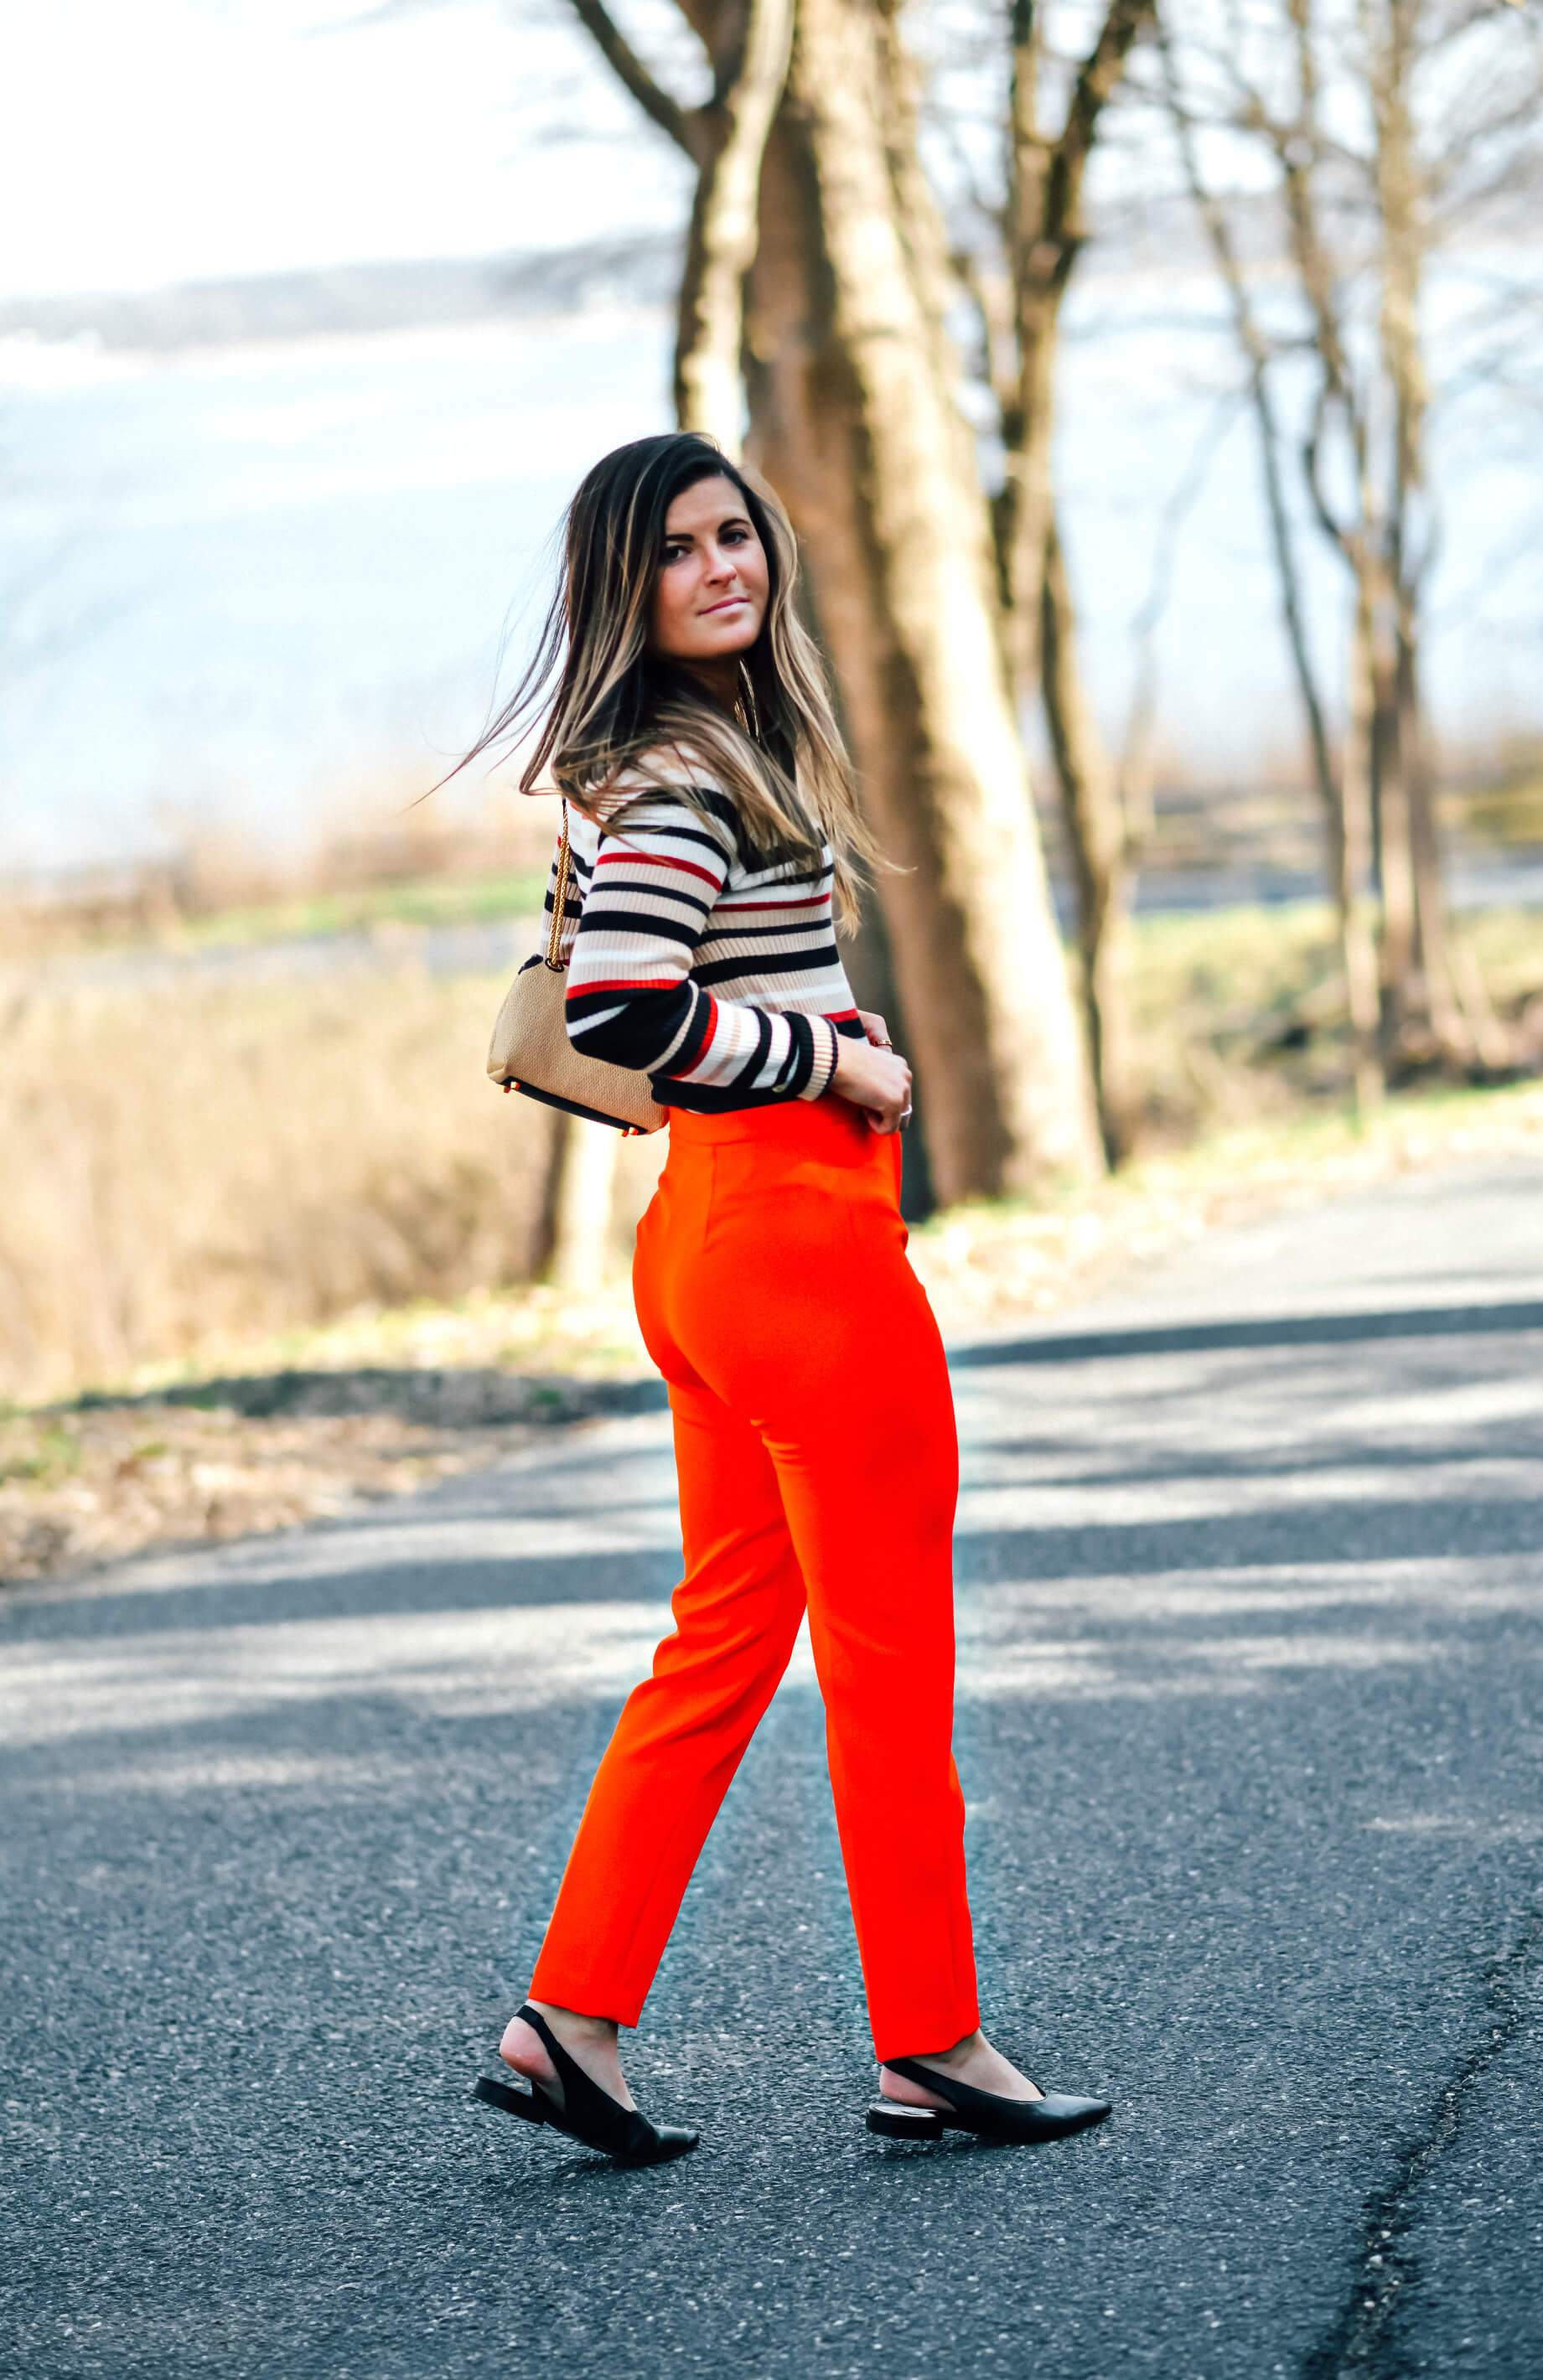 Milly Skinny High Waisted Red Pant, Striped Knit Sweater Top, Sam Edelman Black Slingback Flats, Business Casual Outfit, Spring Business Casual Outfit, Pop of Color Work Outfit, Tilden of To Be Bright